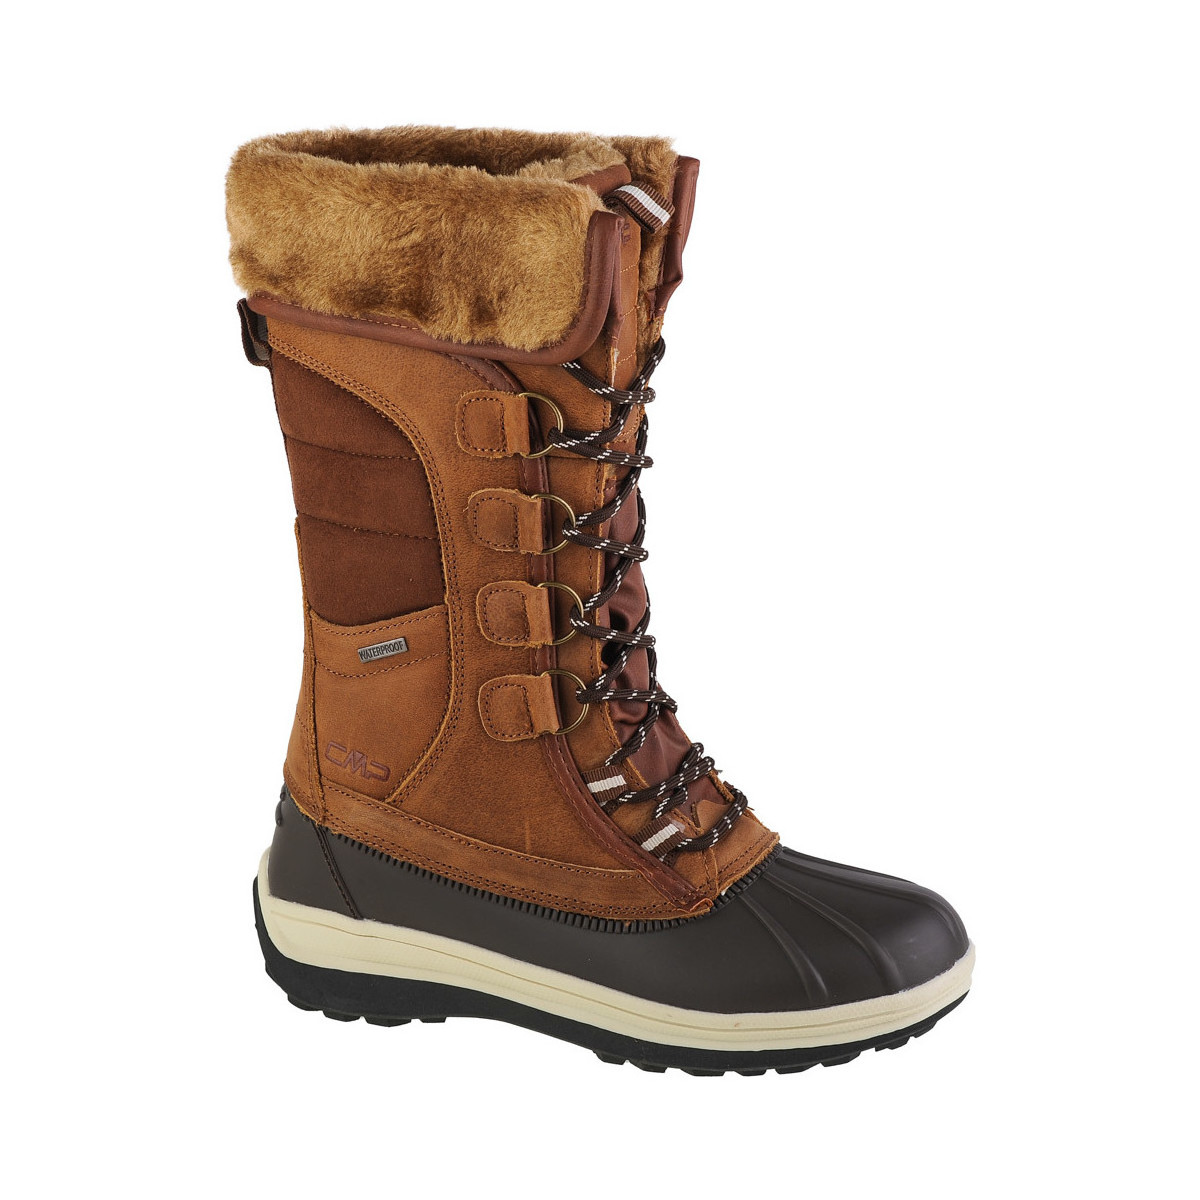 Chaussures Femme Boots Cmp Thalo Wmn Snow Boot Marron